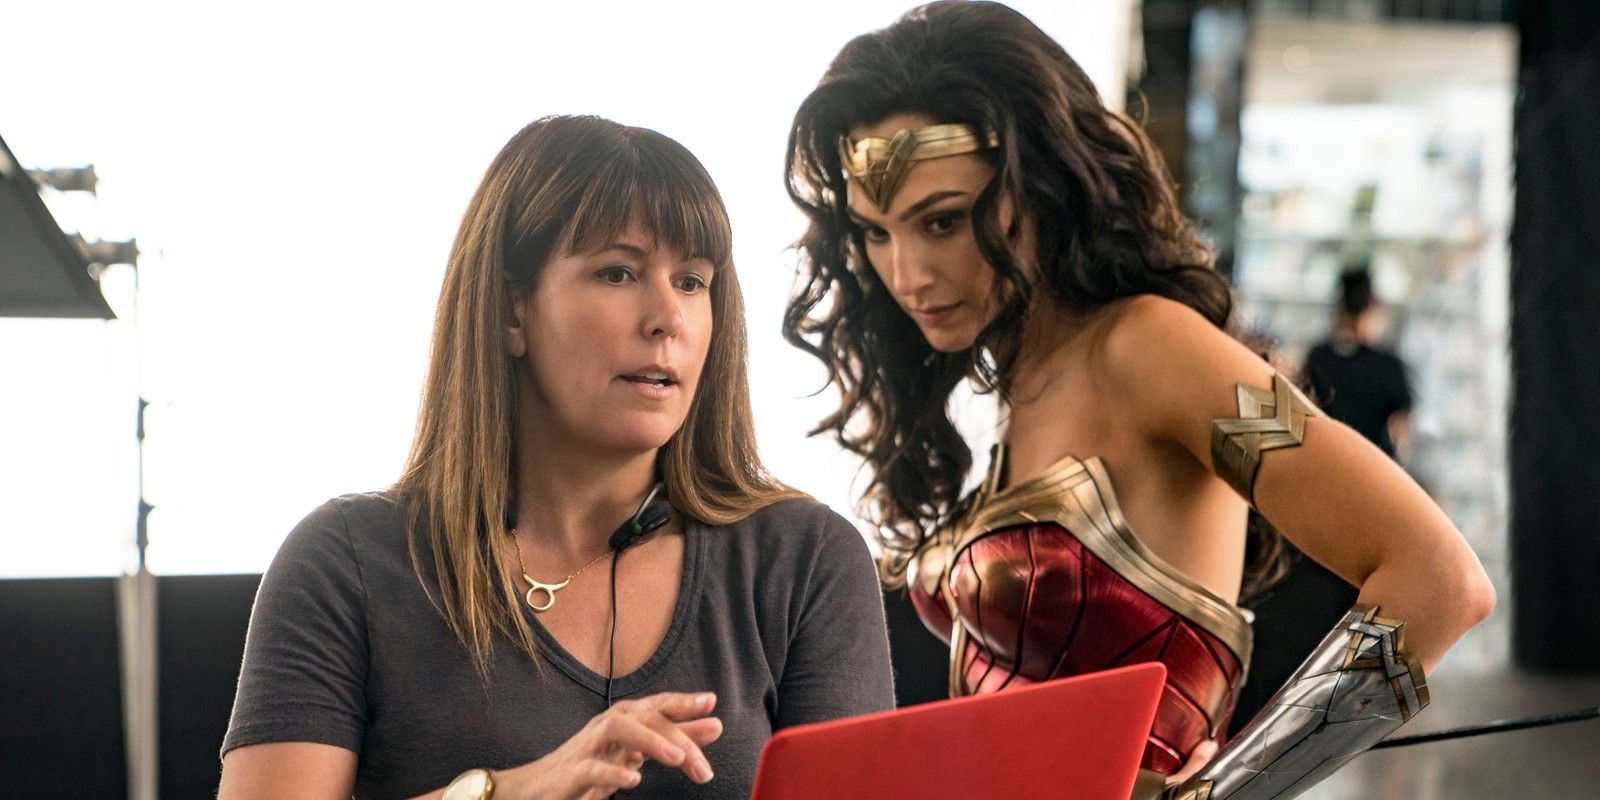 Wonder Woman 1984 Director Almost Passed on Sequel Over Pay Discrepancy